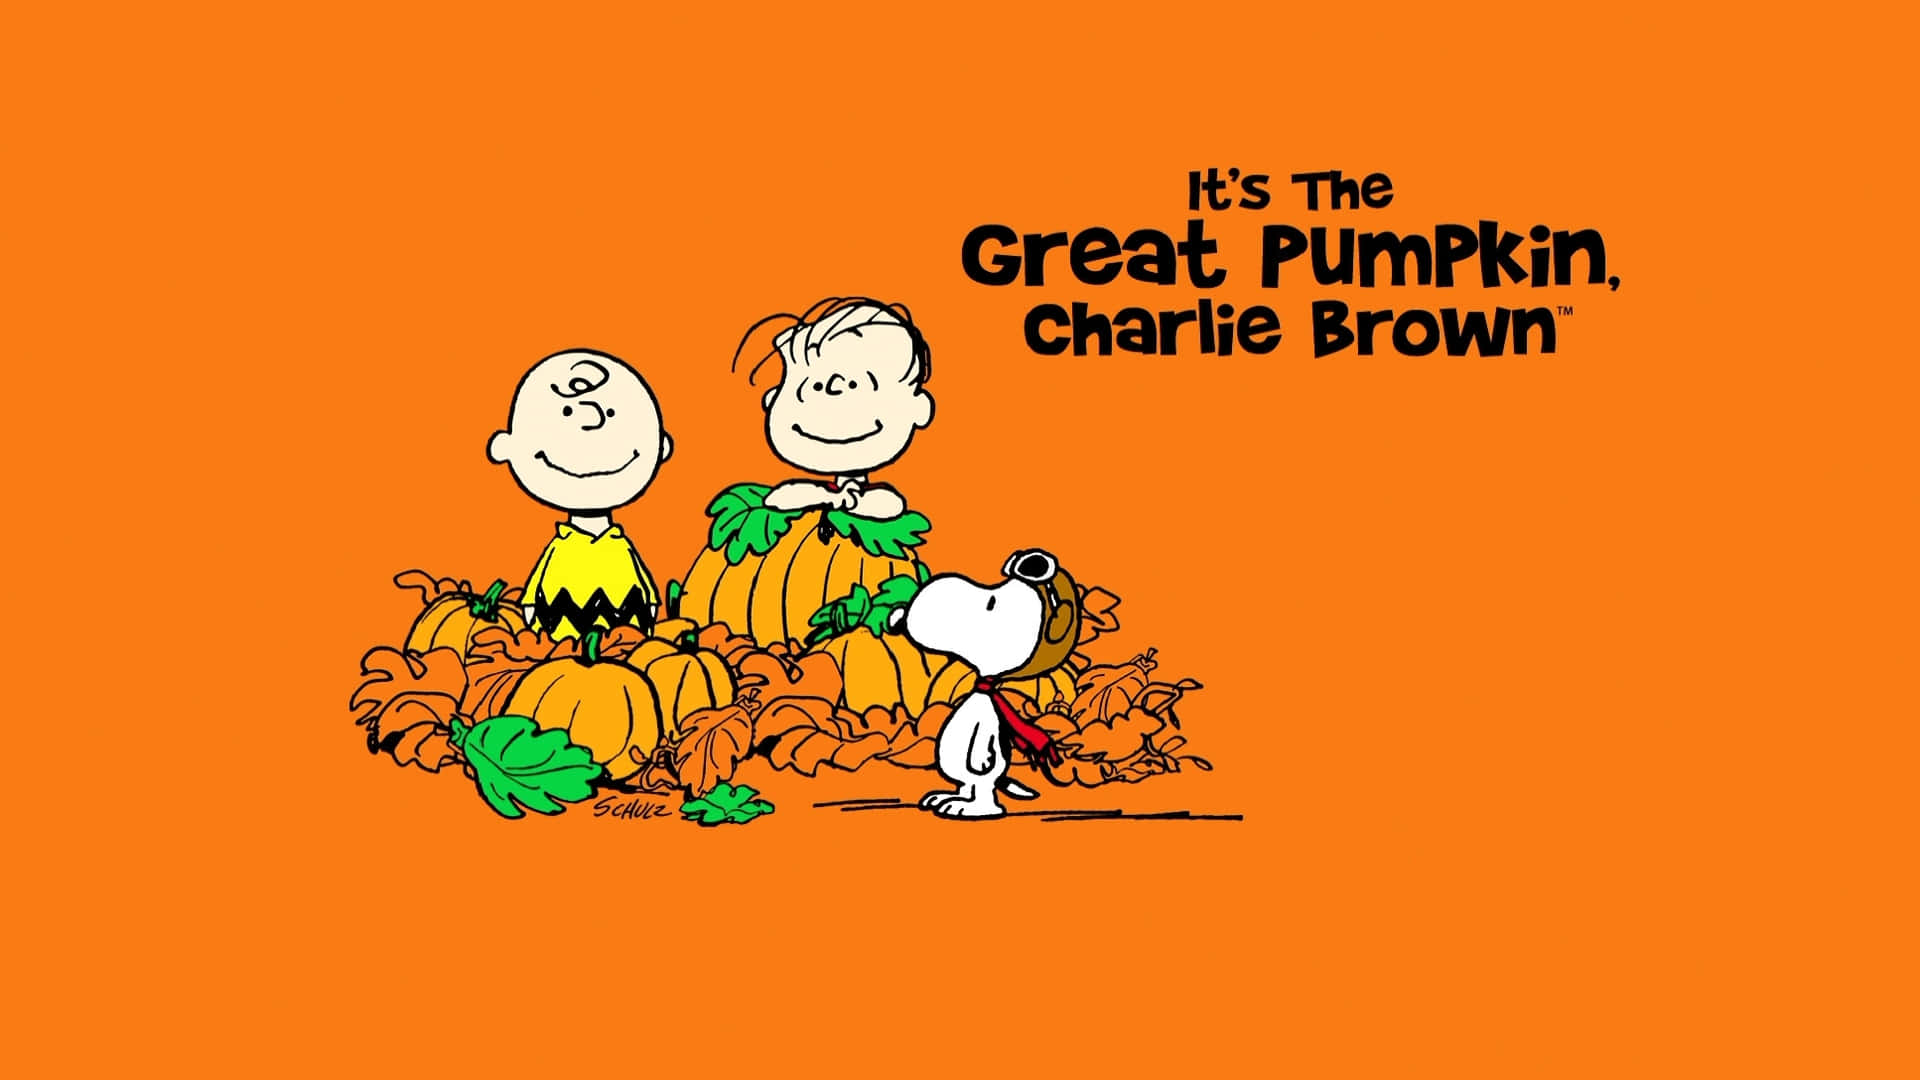 The Great Pumpkin surrounded by a magical atmosphere Wallpaper